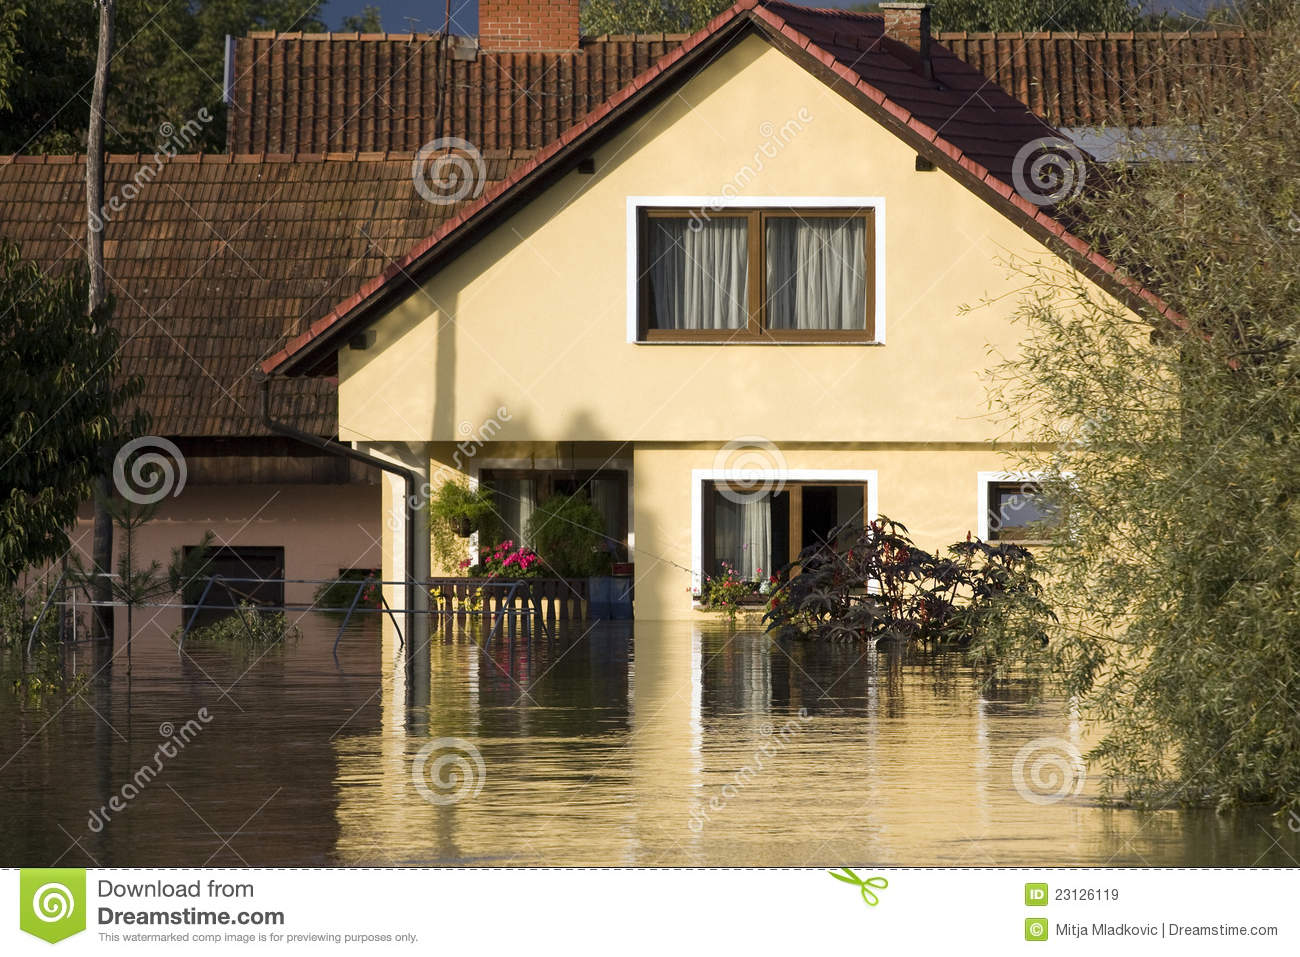 Flooded House Royalty Free Stock Images   Image  23126119